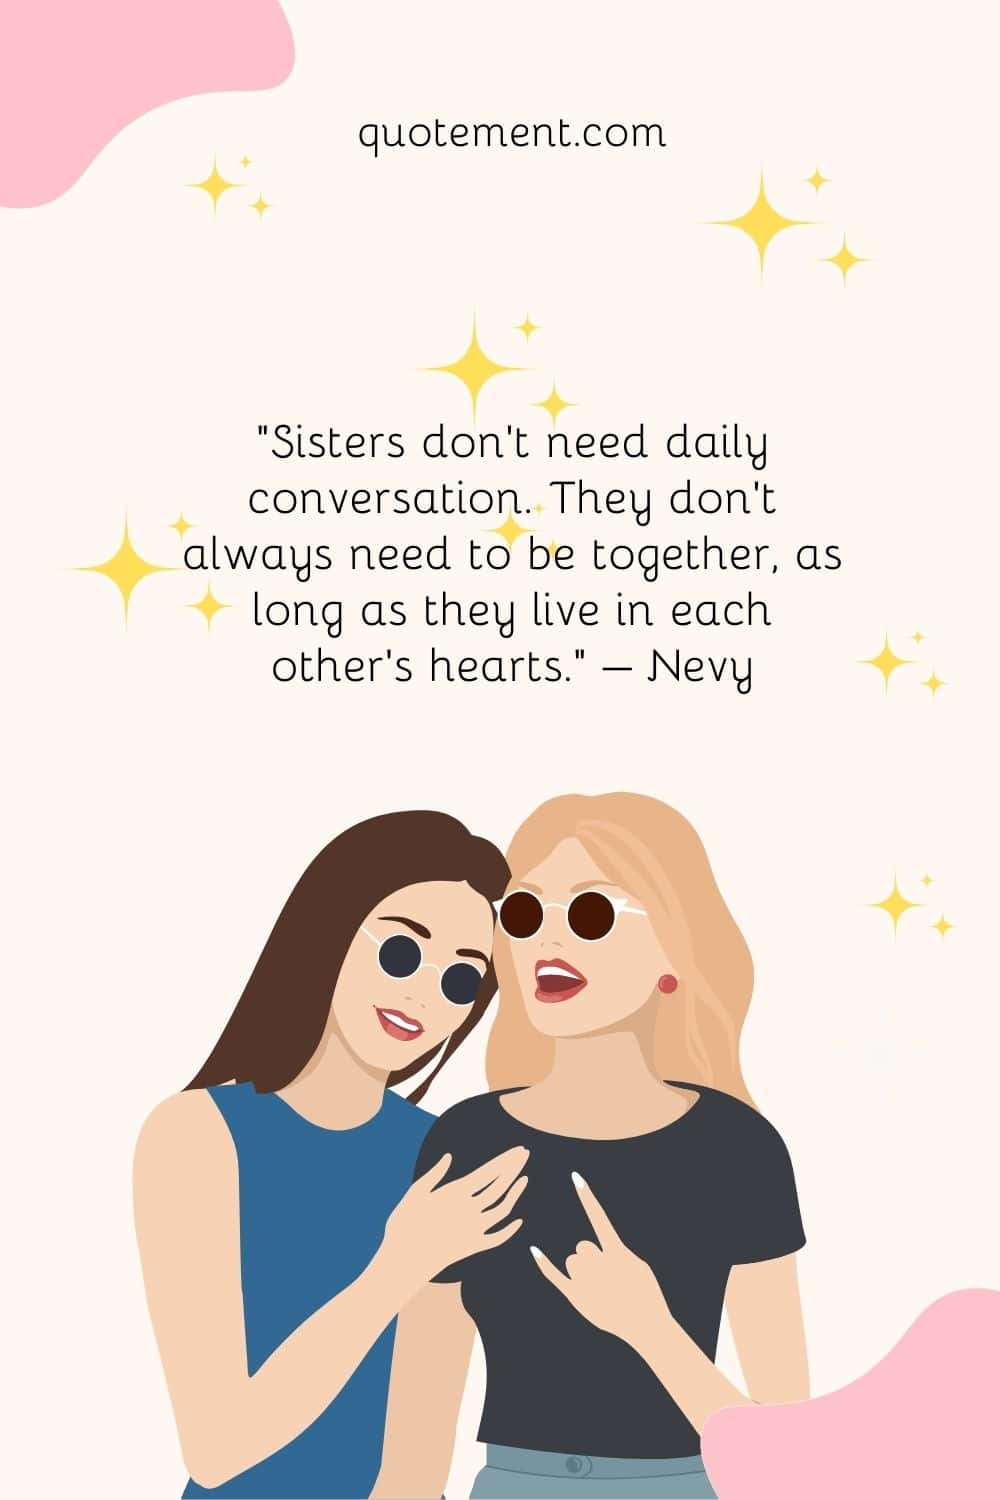 “Sisters don’t need daily conversation. They don’t always need to be together, as long as they live in each other’s hearts.” – Nevy